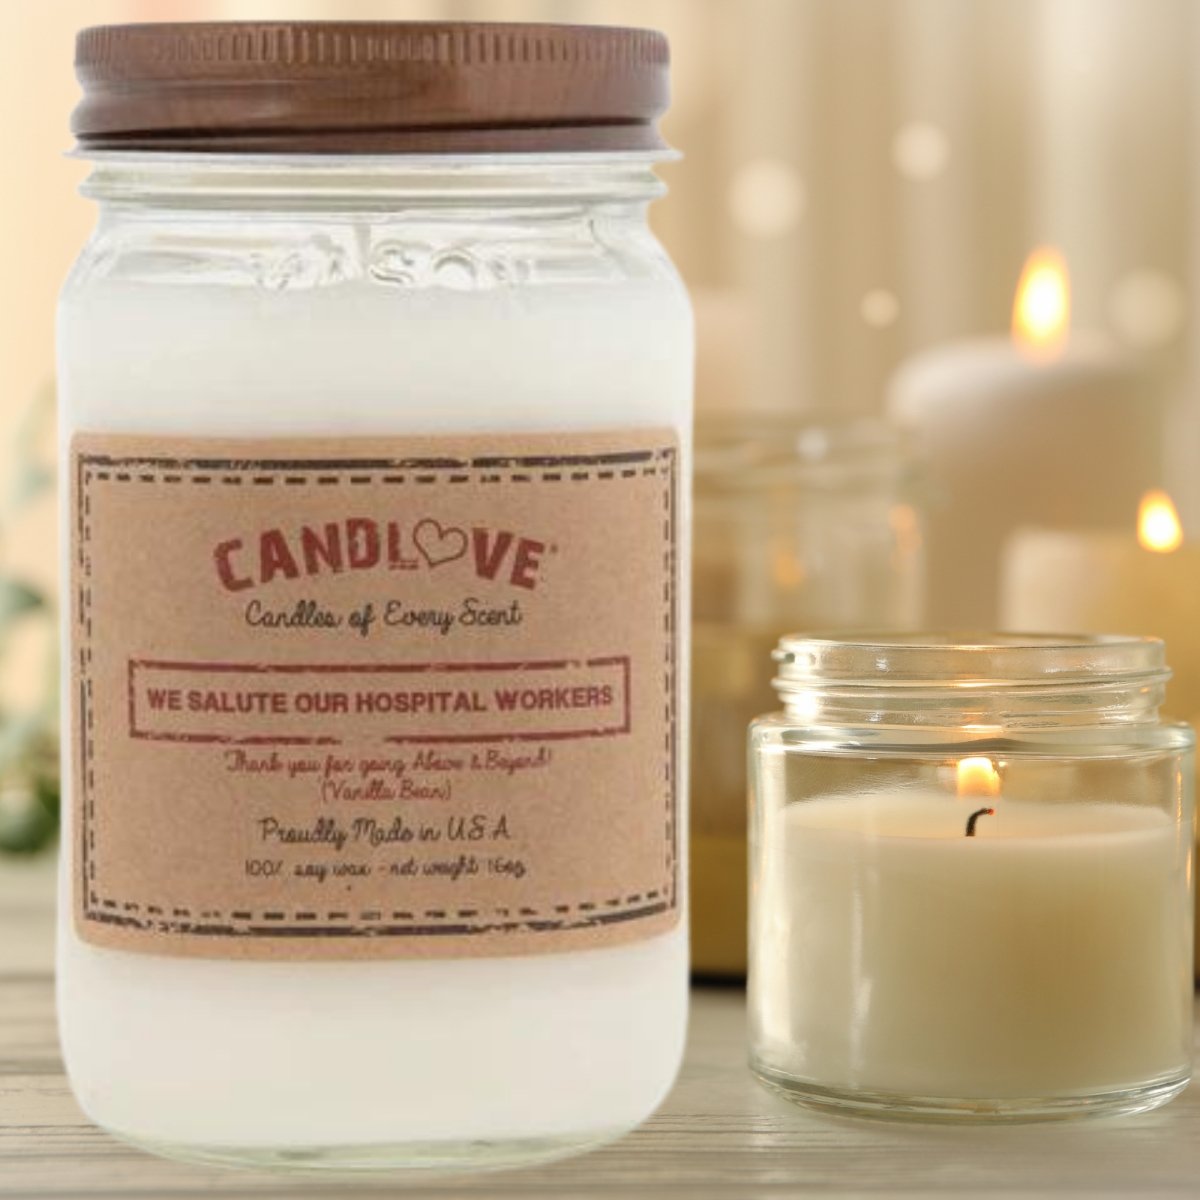 Picture of PPI SUPPLIES Vanilla-H-C Candlove Vanilla We Salute Hospital Workers Scented Candle - Non-Toxic 100% Soy Candle - Handmade & Hand Poured Long Burning Candle - Highly Scented All Natural Clean Burning Candle (16 OZ Mason Jar) Made in The USA